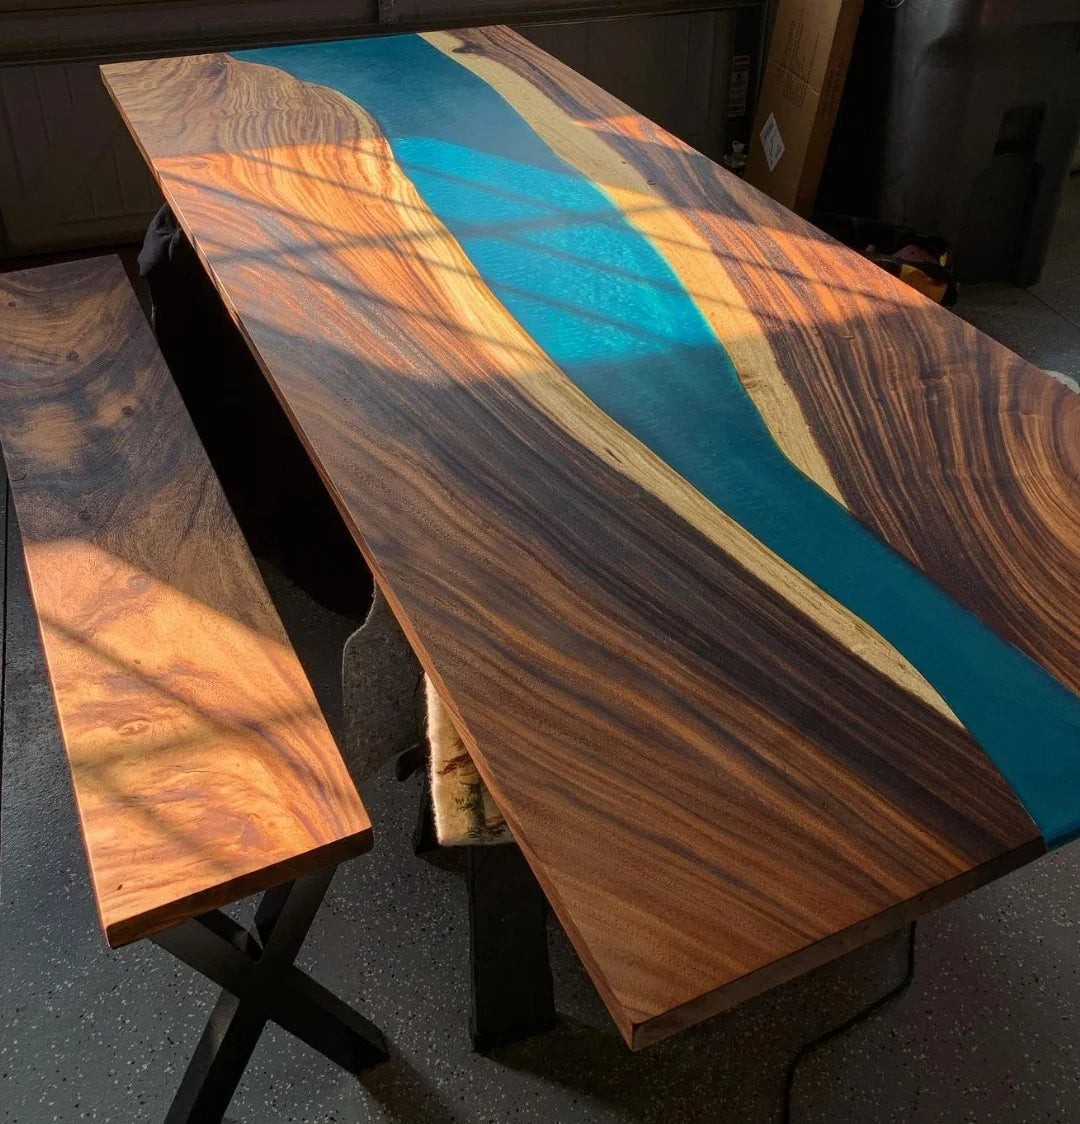 How Much Does A Live Edge Resin Table Cost?